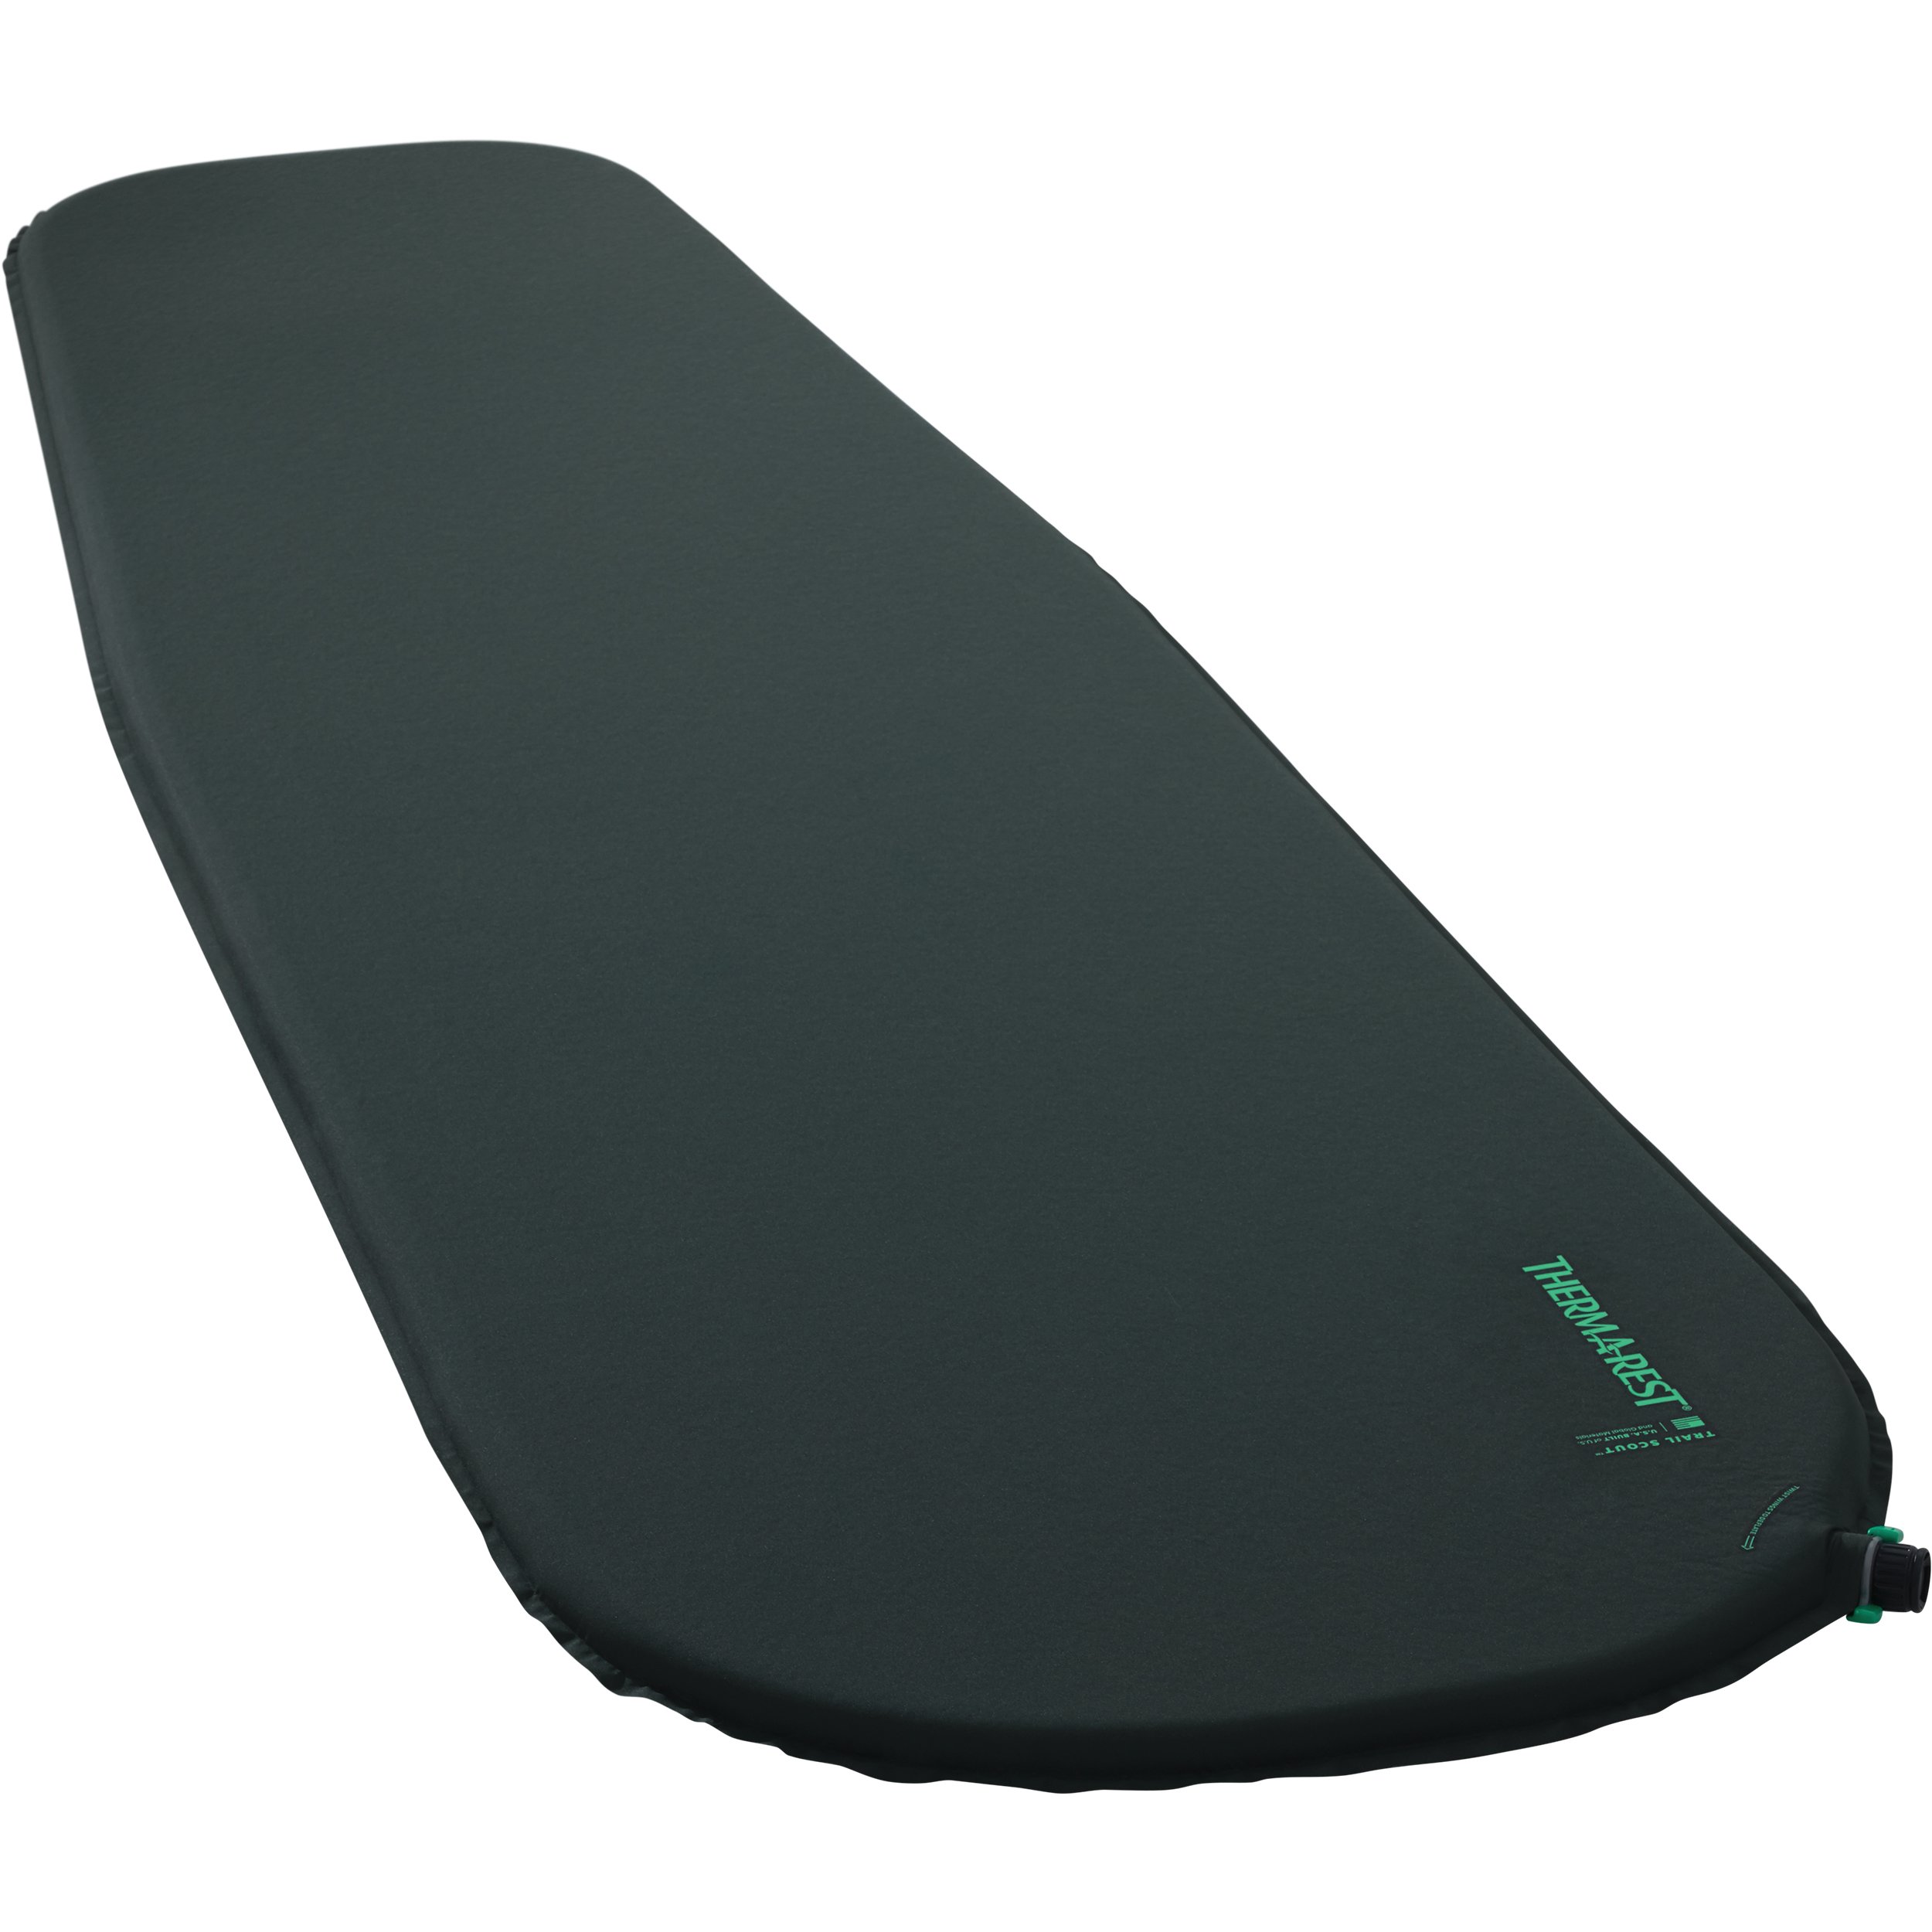 Trail Mat - The Utility Mat For Trail And Camp